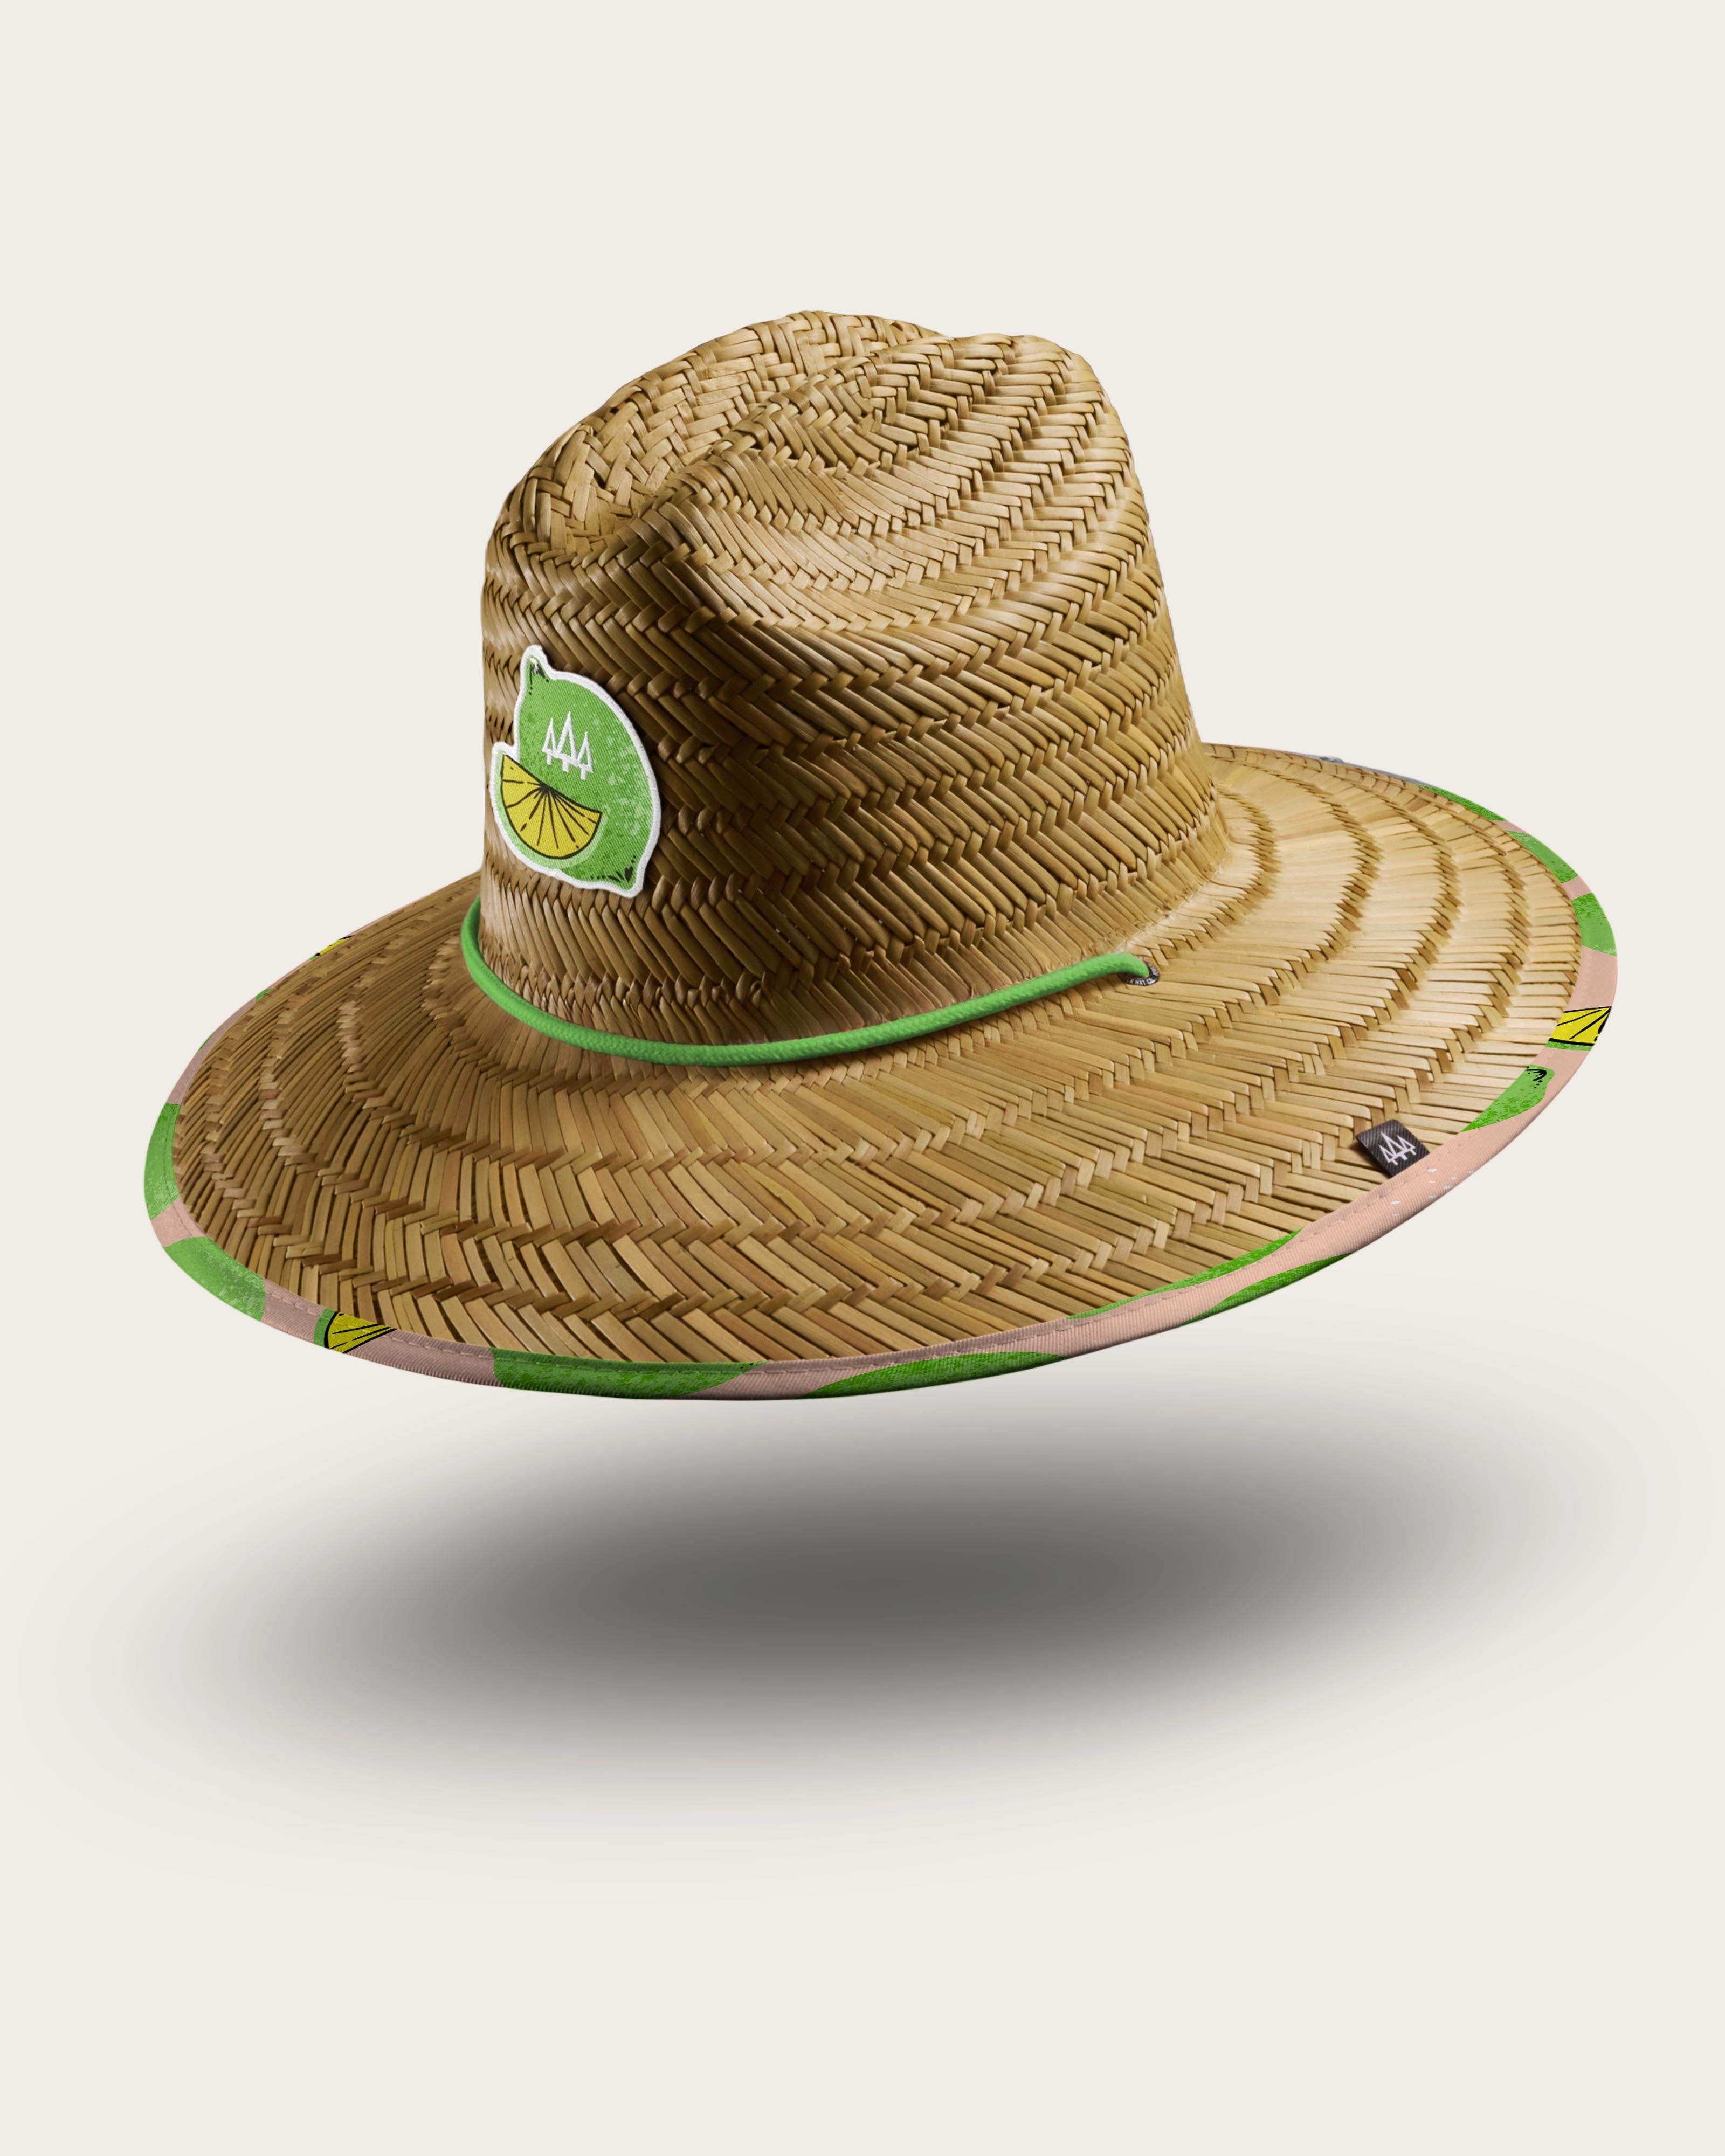 Hemlock Cadillac straw lifeguard hat with lime pattern with patch